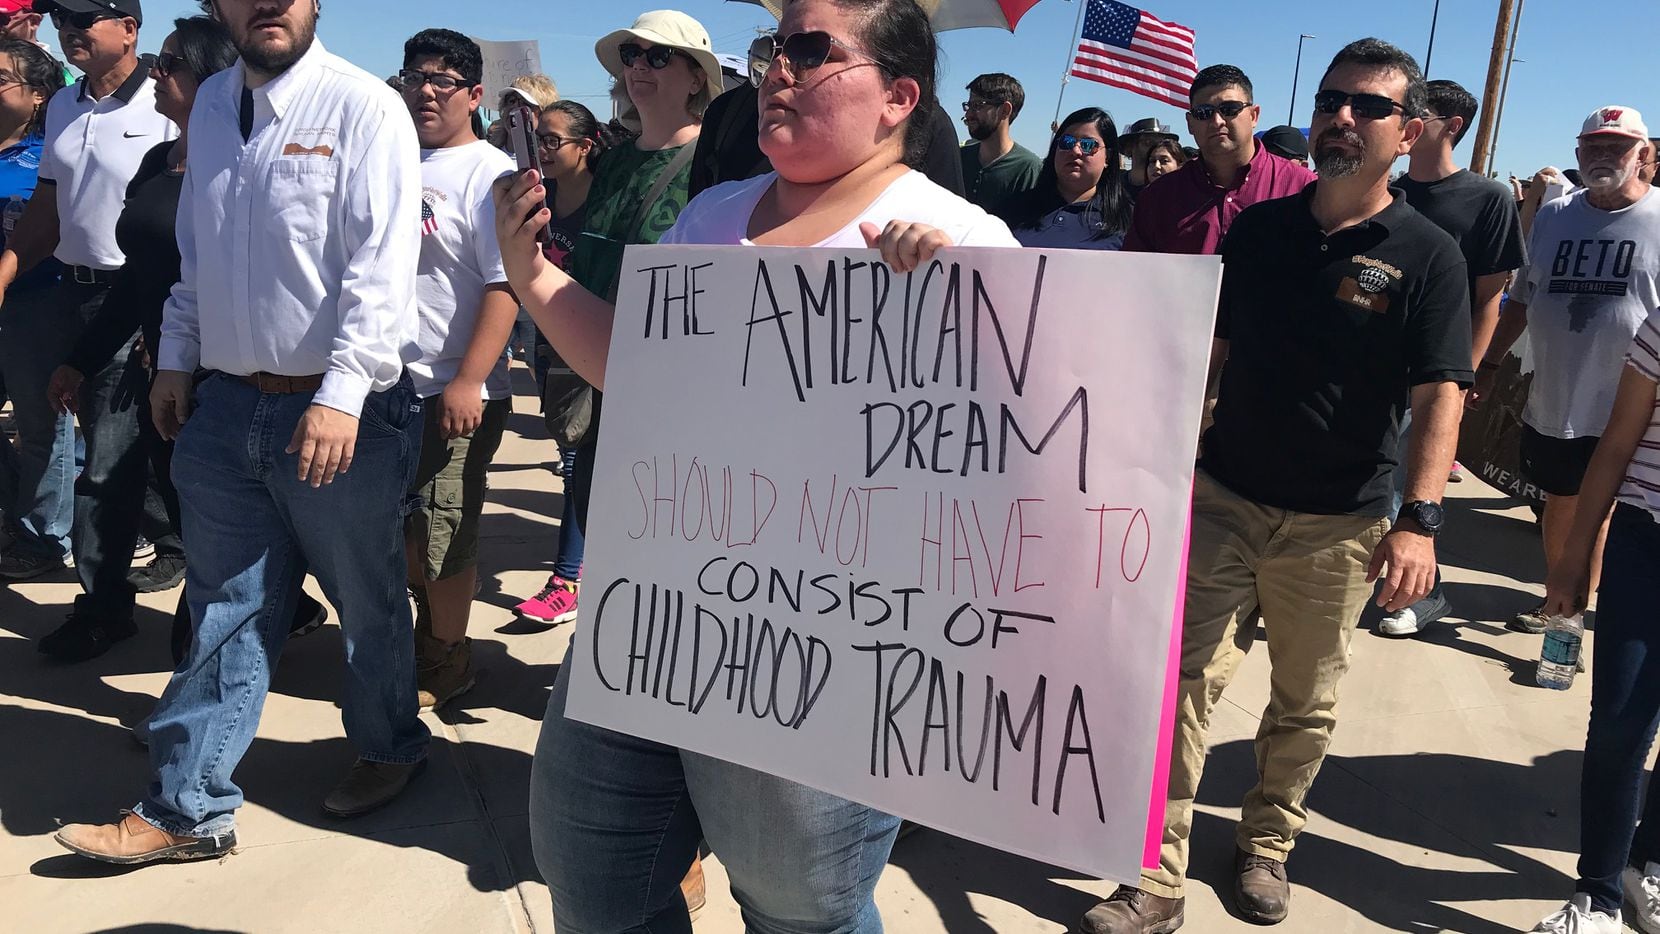 Hundreds of protesters descended in Tornillo, Texas to protest policies that separate families.